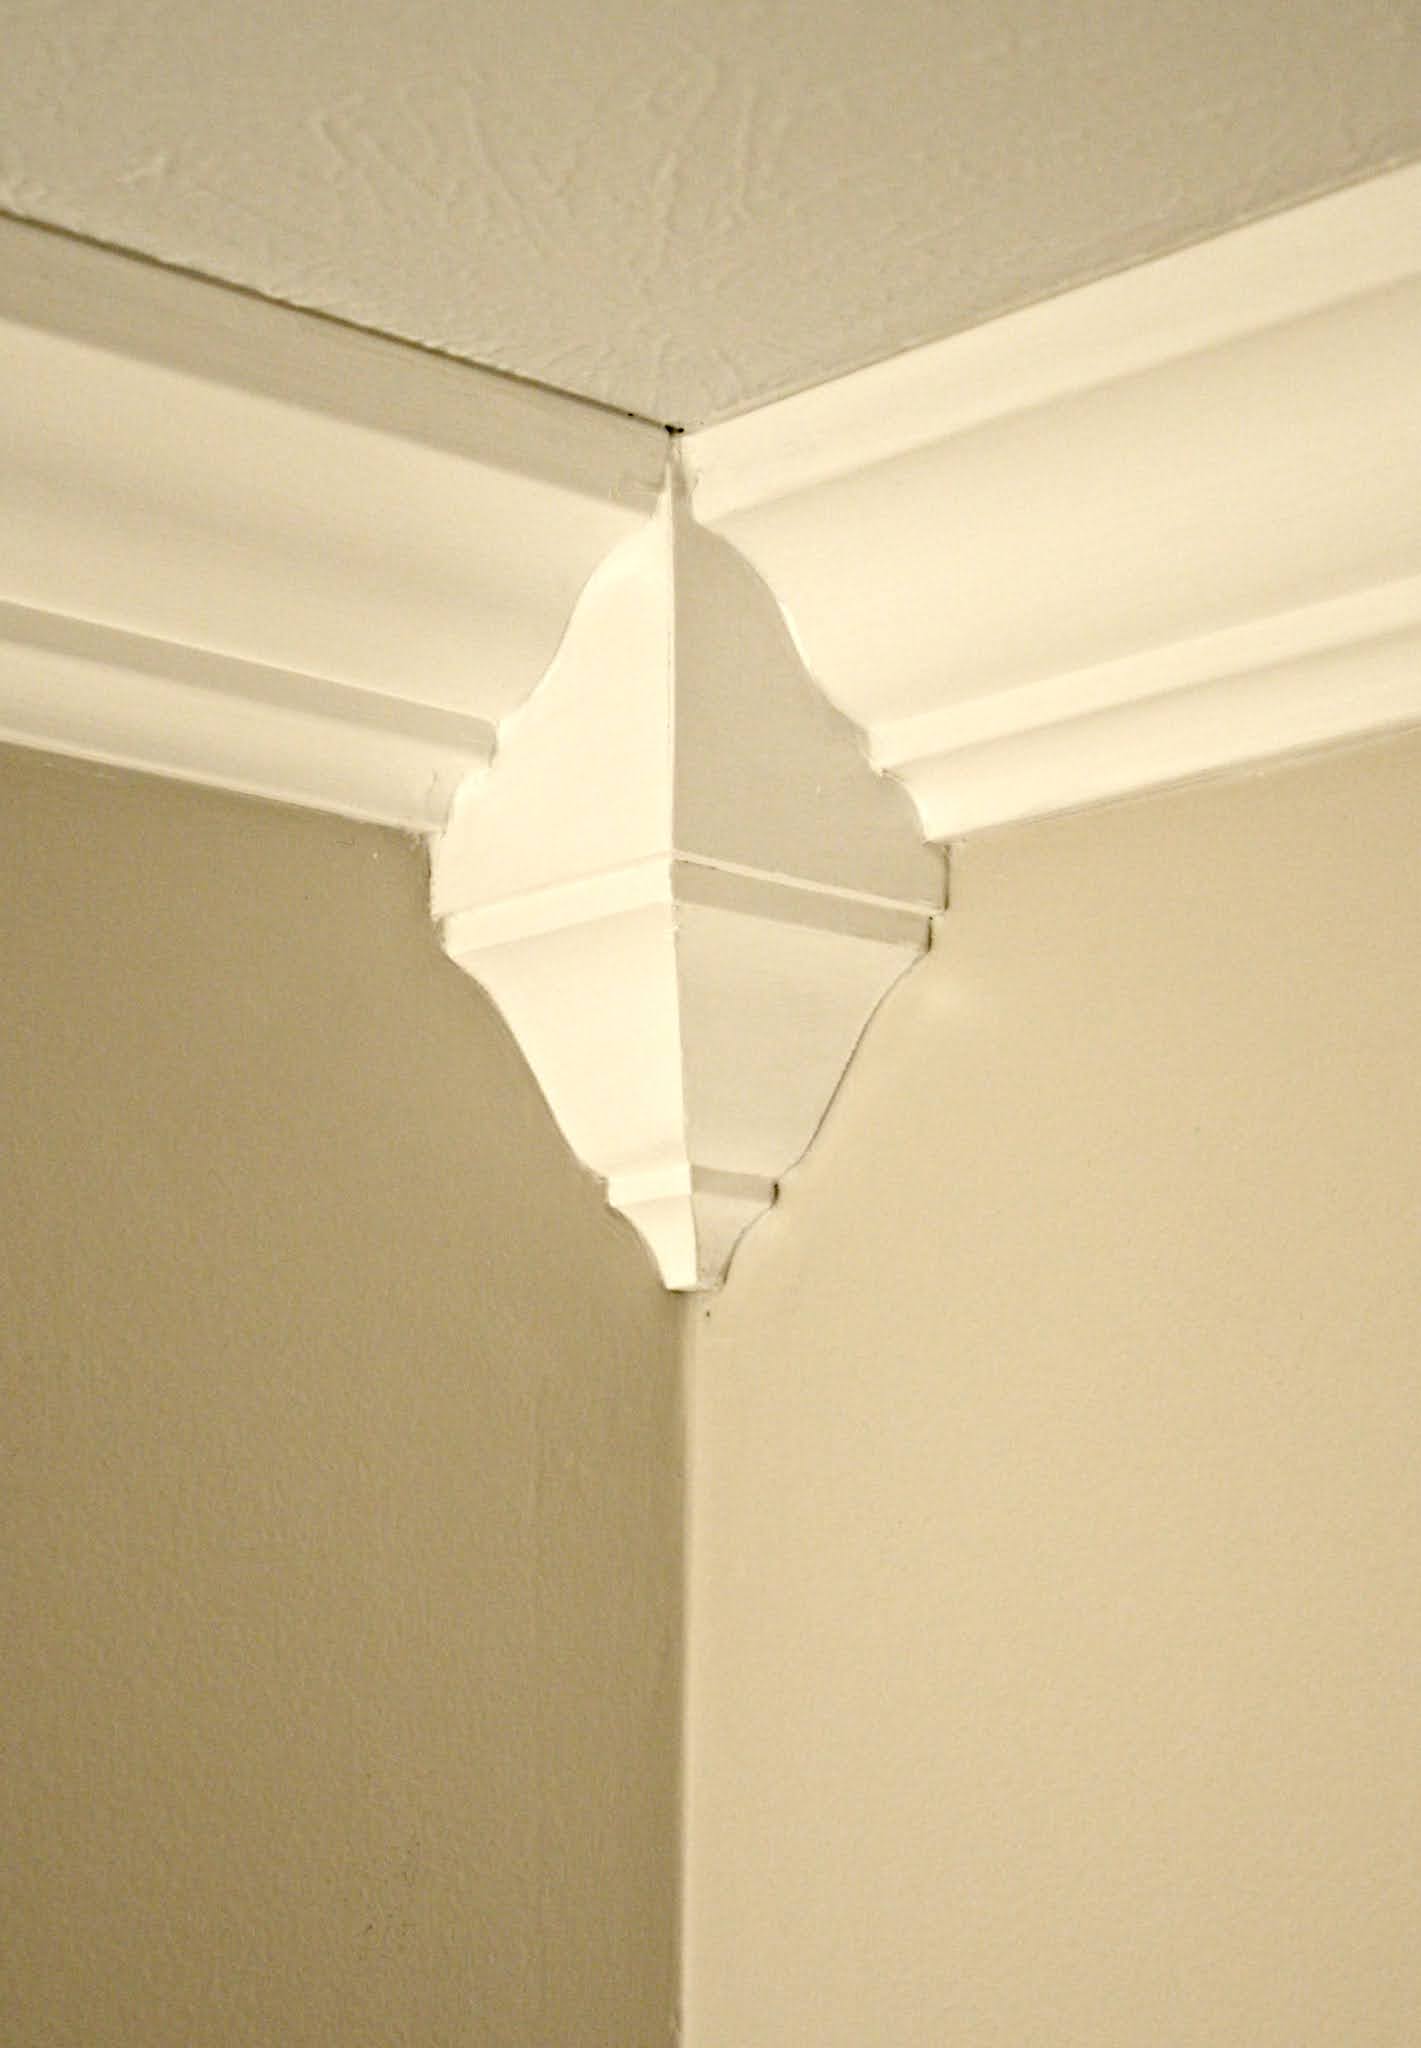 Installing Crown Molding: Getting started and Pro tips - MyFixitUpLife